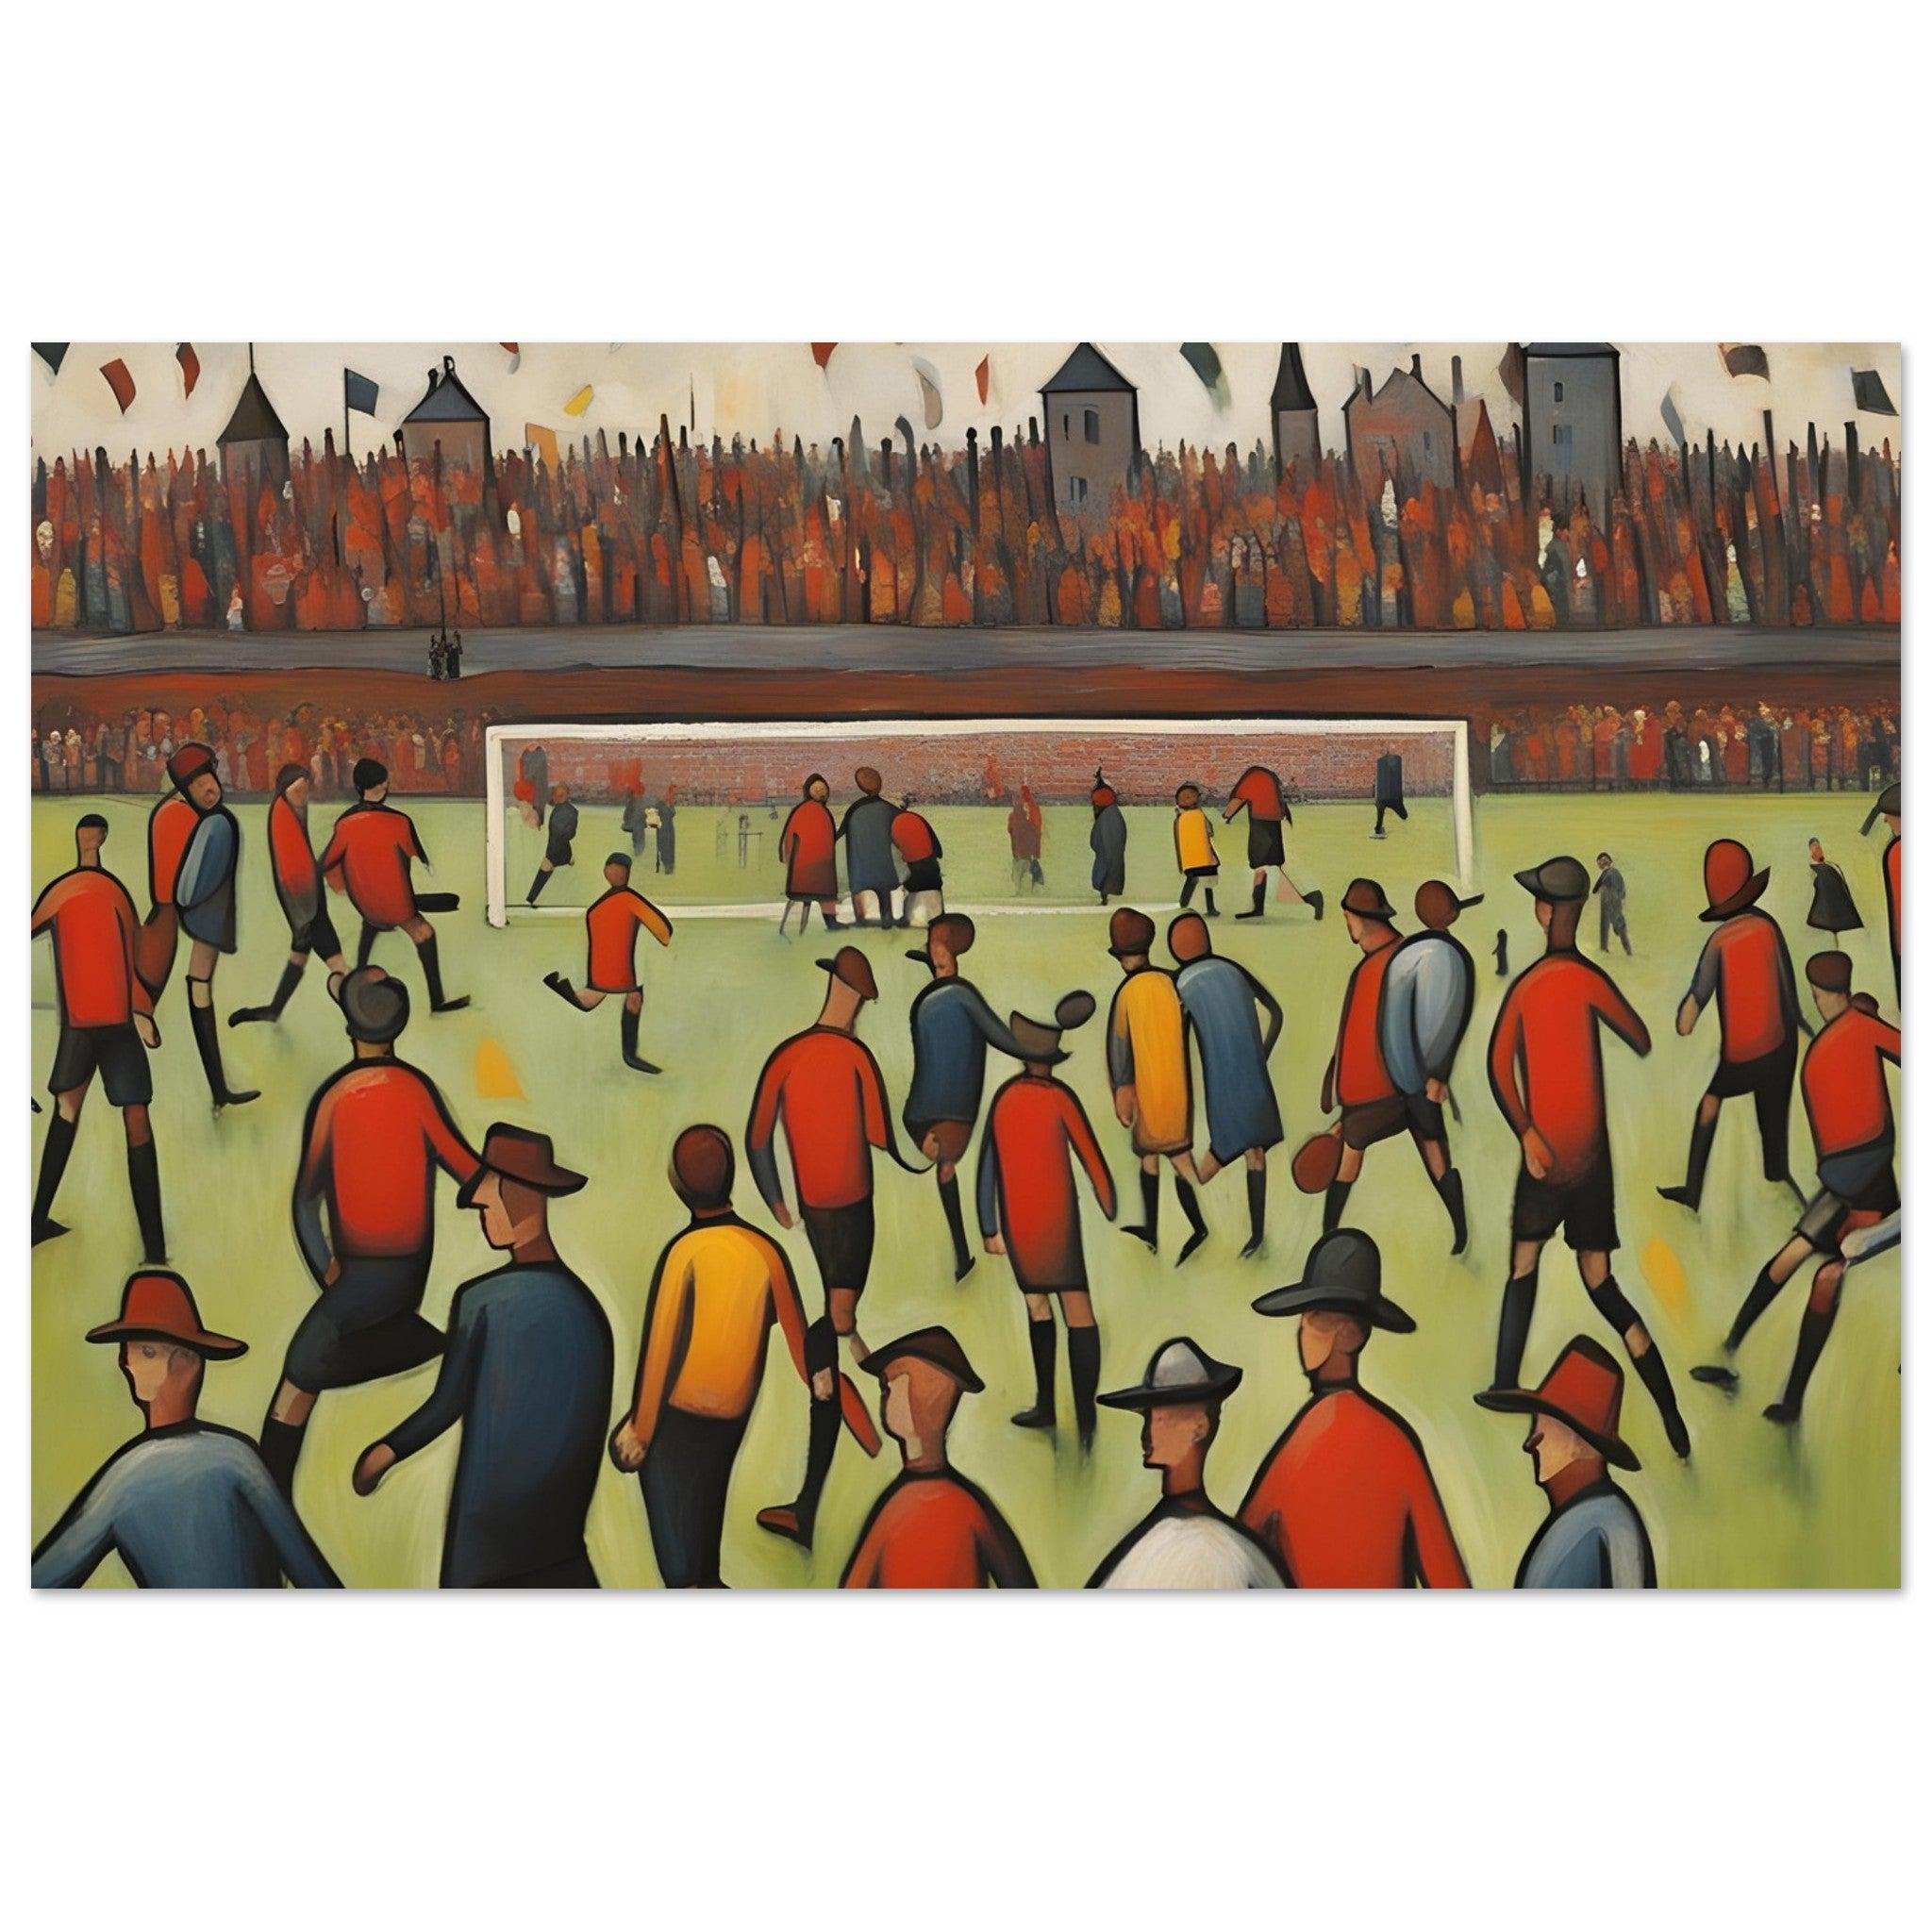 Home Decor Wall Art - Pitch Invasion